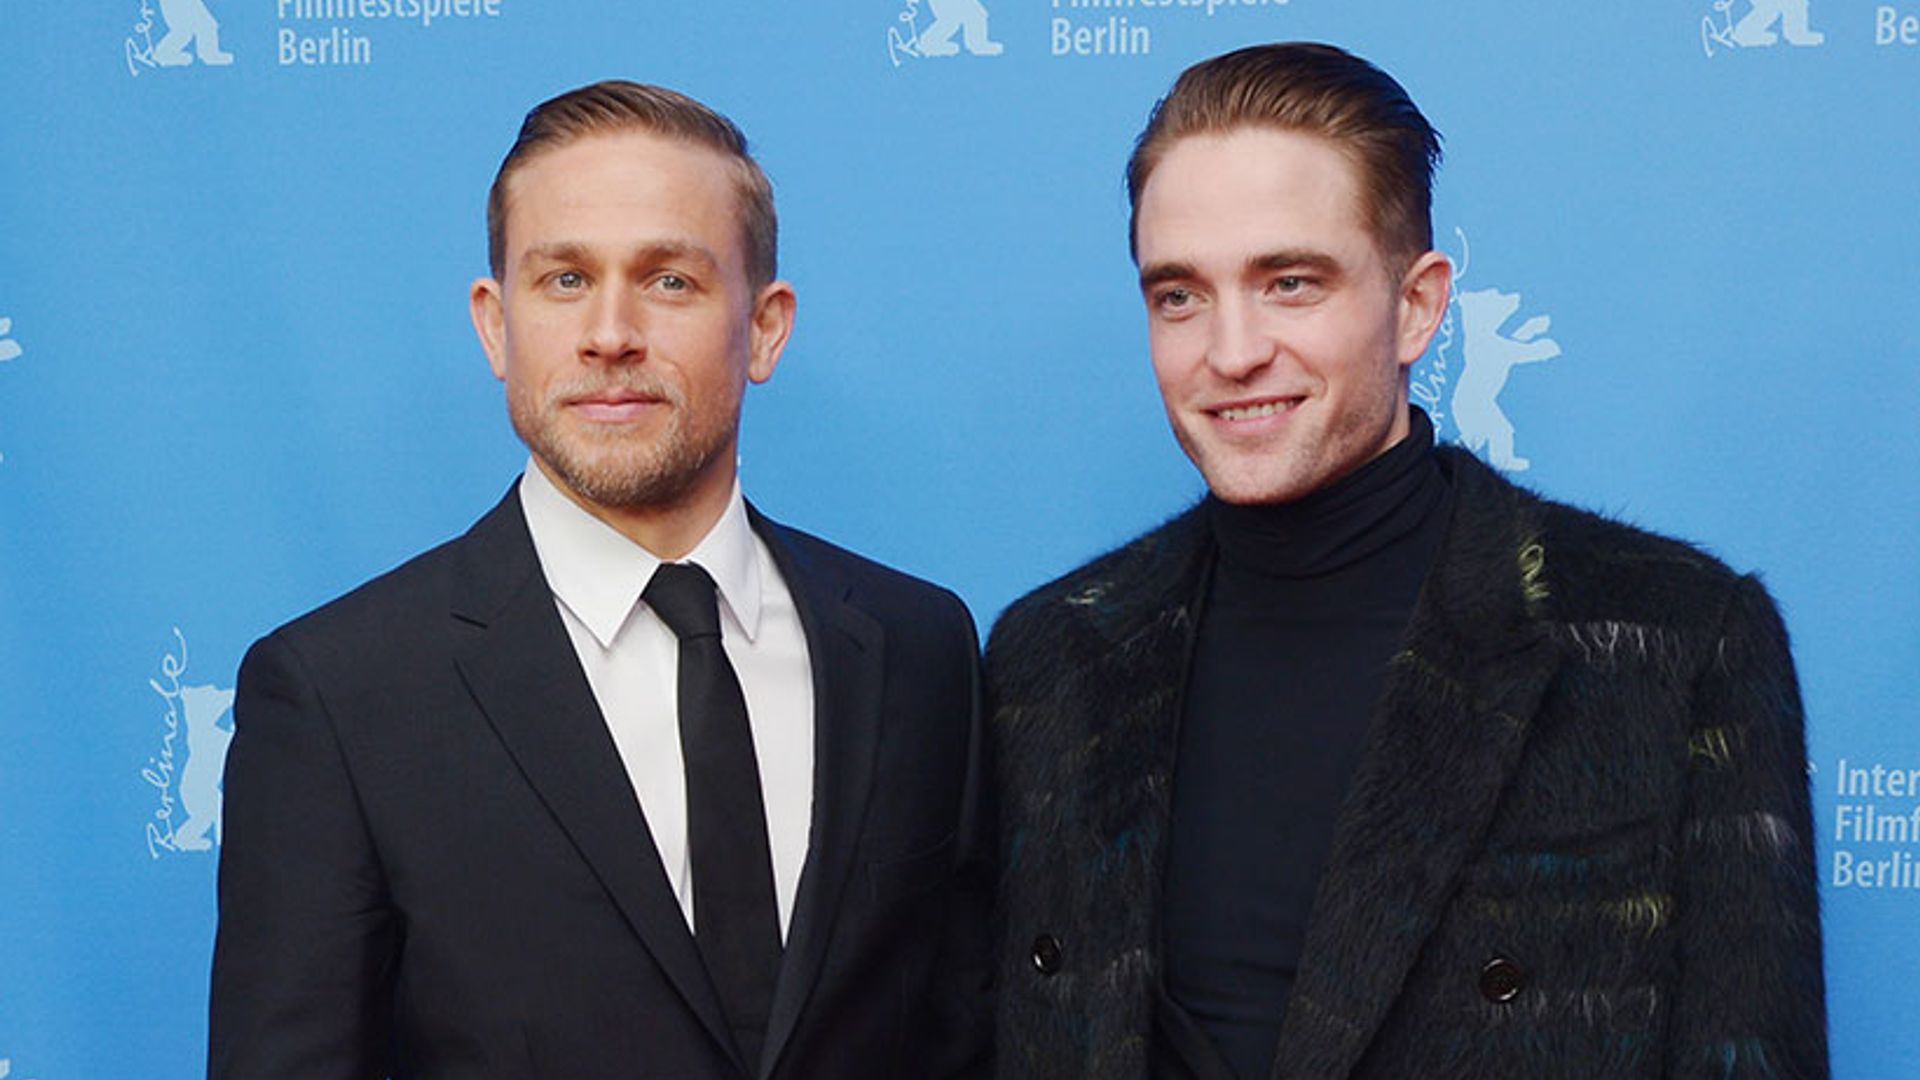 Charlie Hunnam discusses strained working relationship with co-star Robert Pattinson